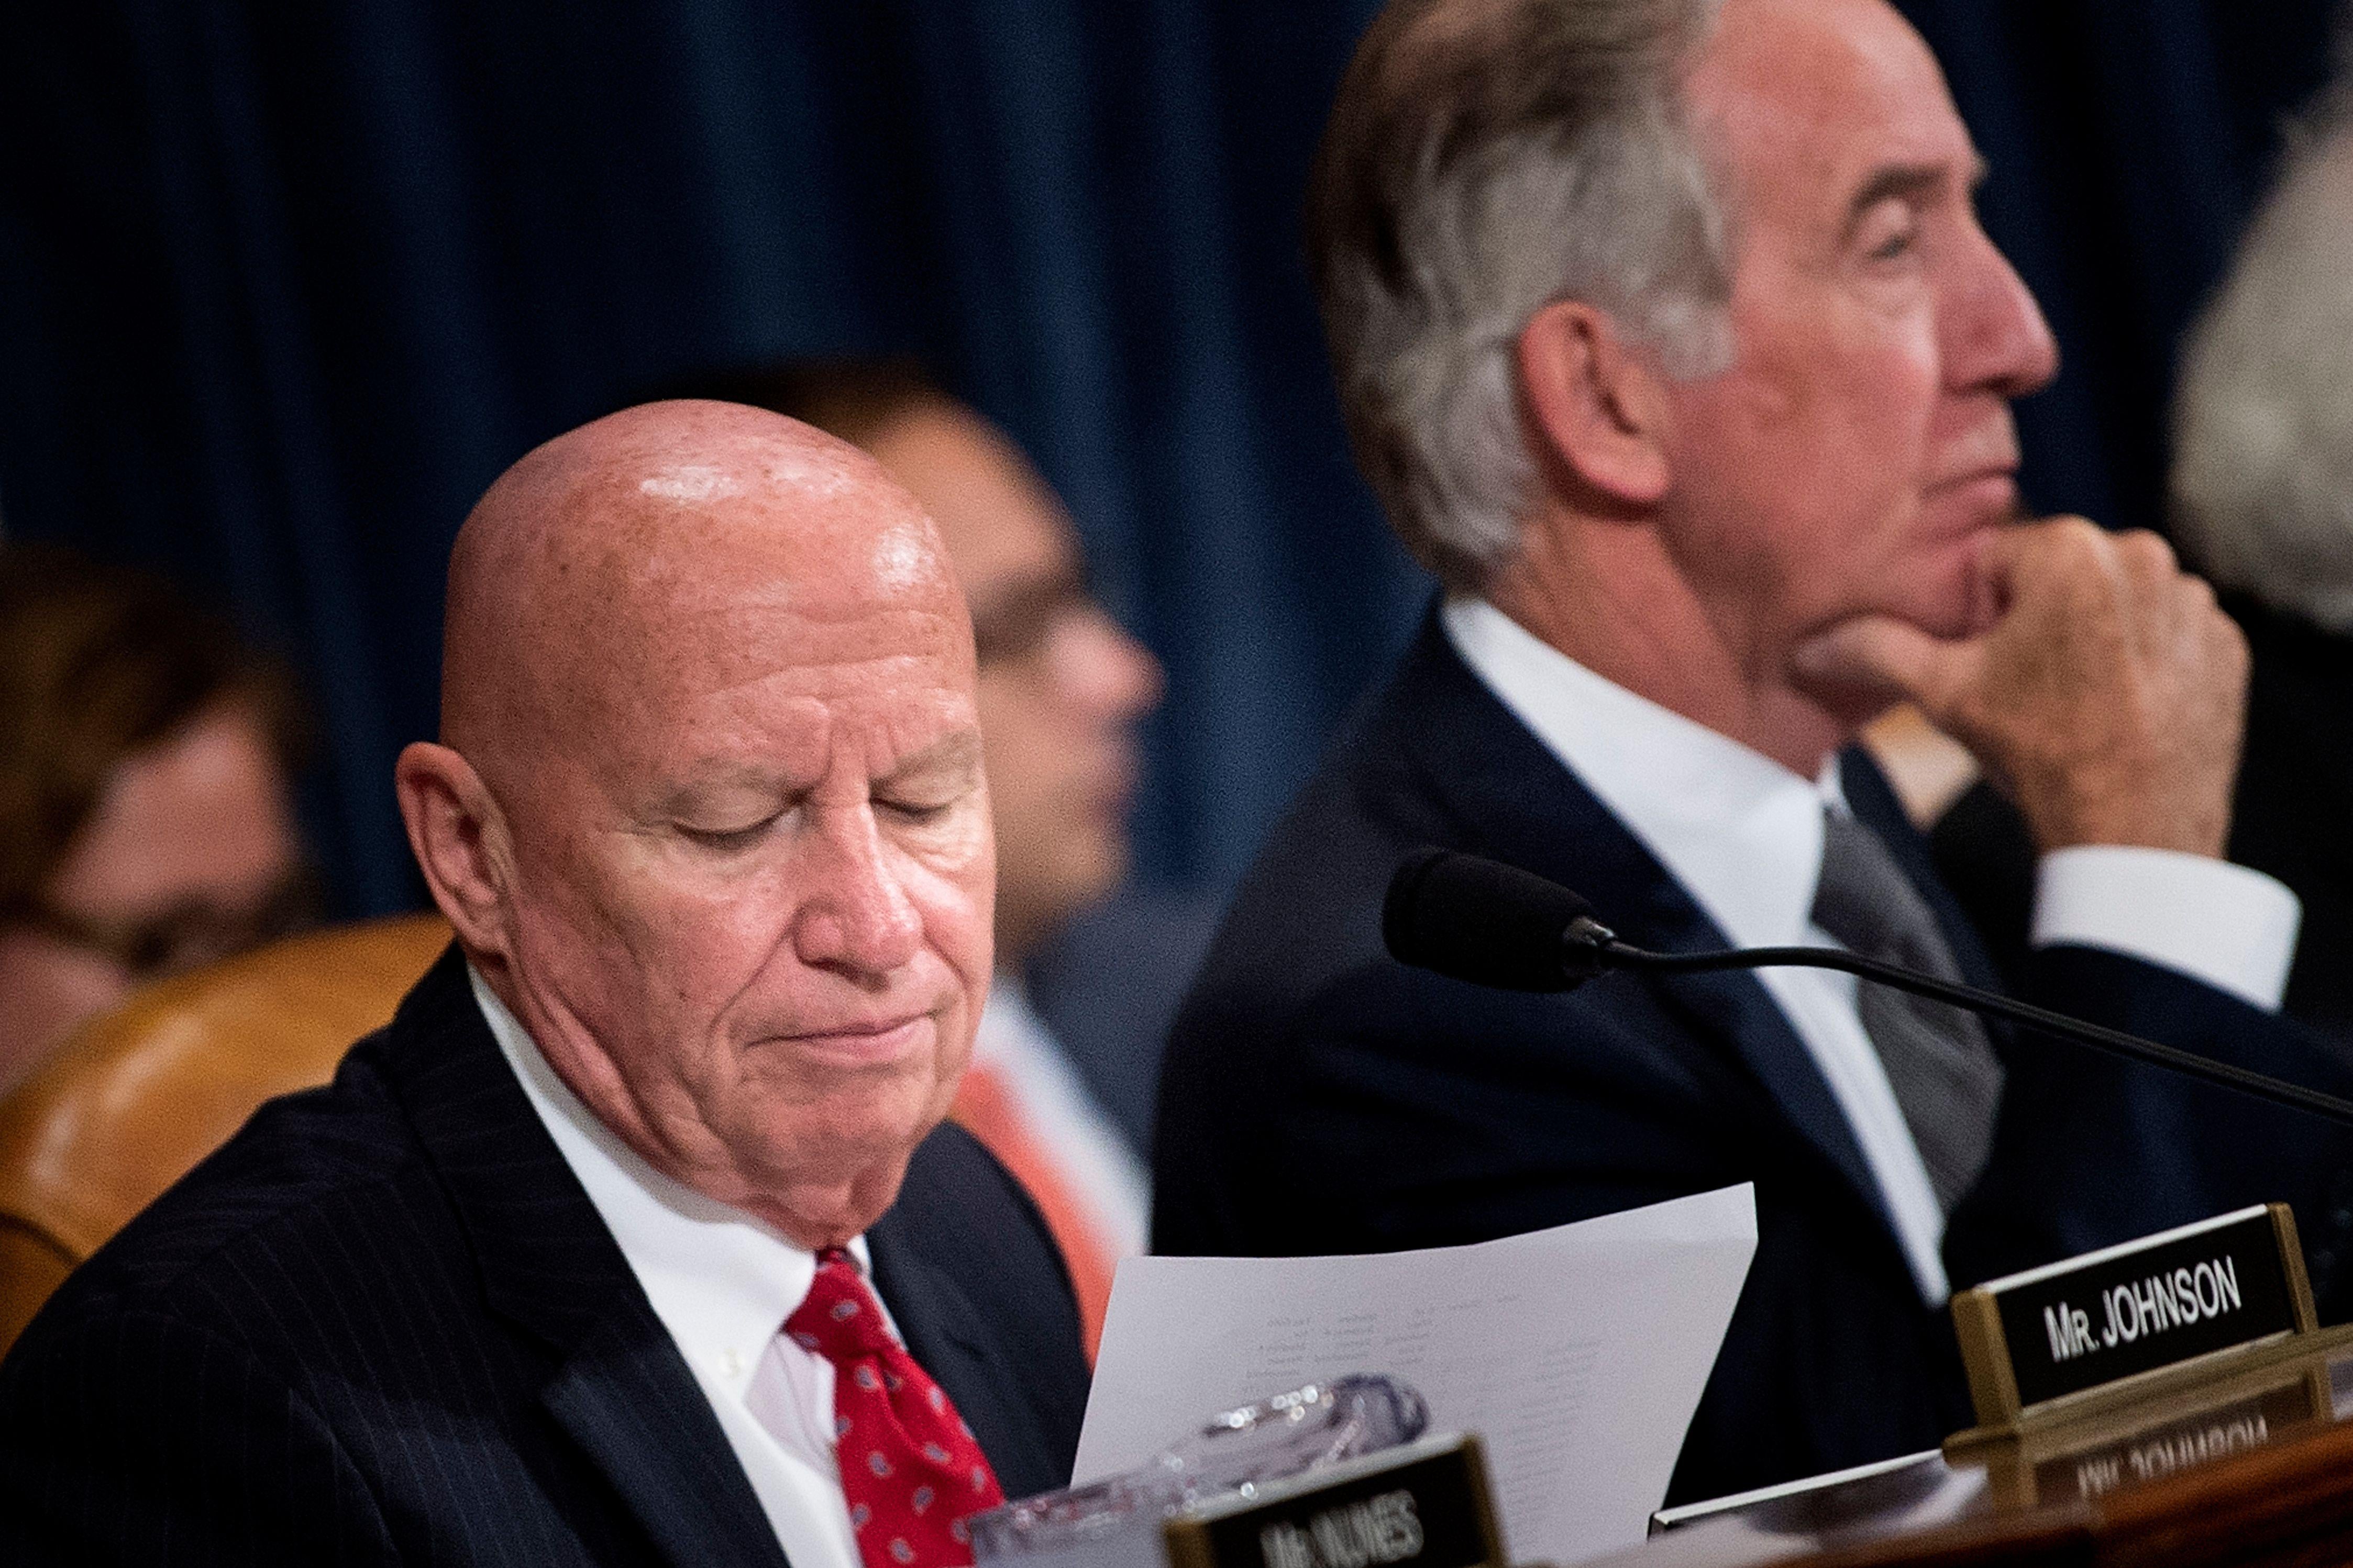 Committee chairman Rep. Kevin Brady and ranking member Rep. Richard Neal listen during a markup of the Tax Cuts and Jobs Act  before the House Ways and Means Committee on Nov. 6, 2017 in Washington, D.C. / AFP PHOTO / Brendan Smialowski        (Photo credit should read BRENDAN SMIALOWSKI/AFP/Getty Images)